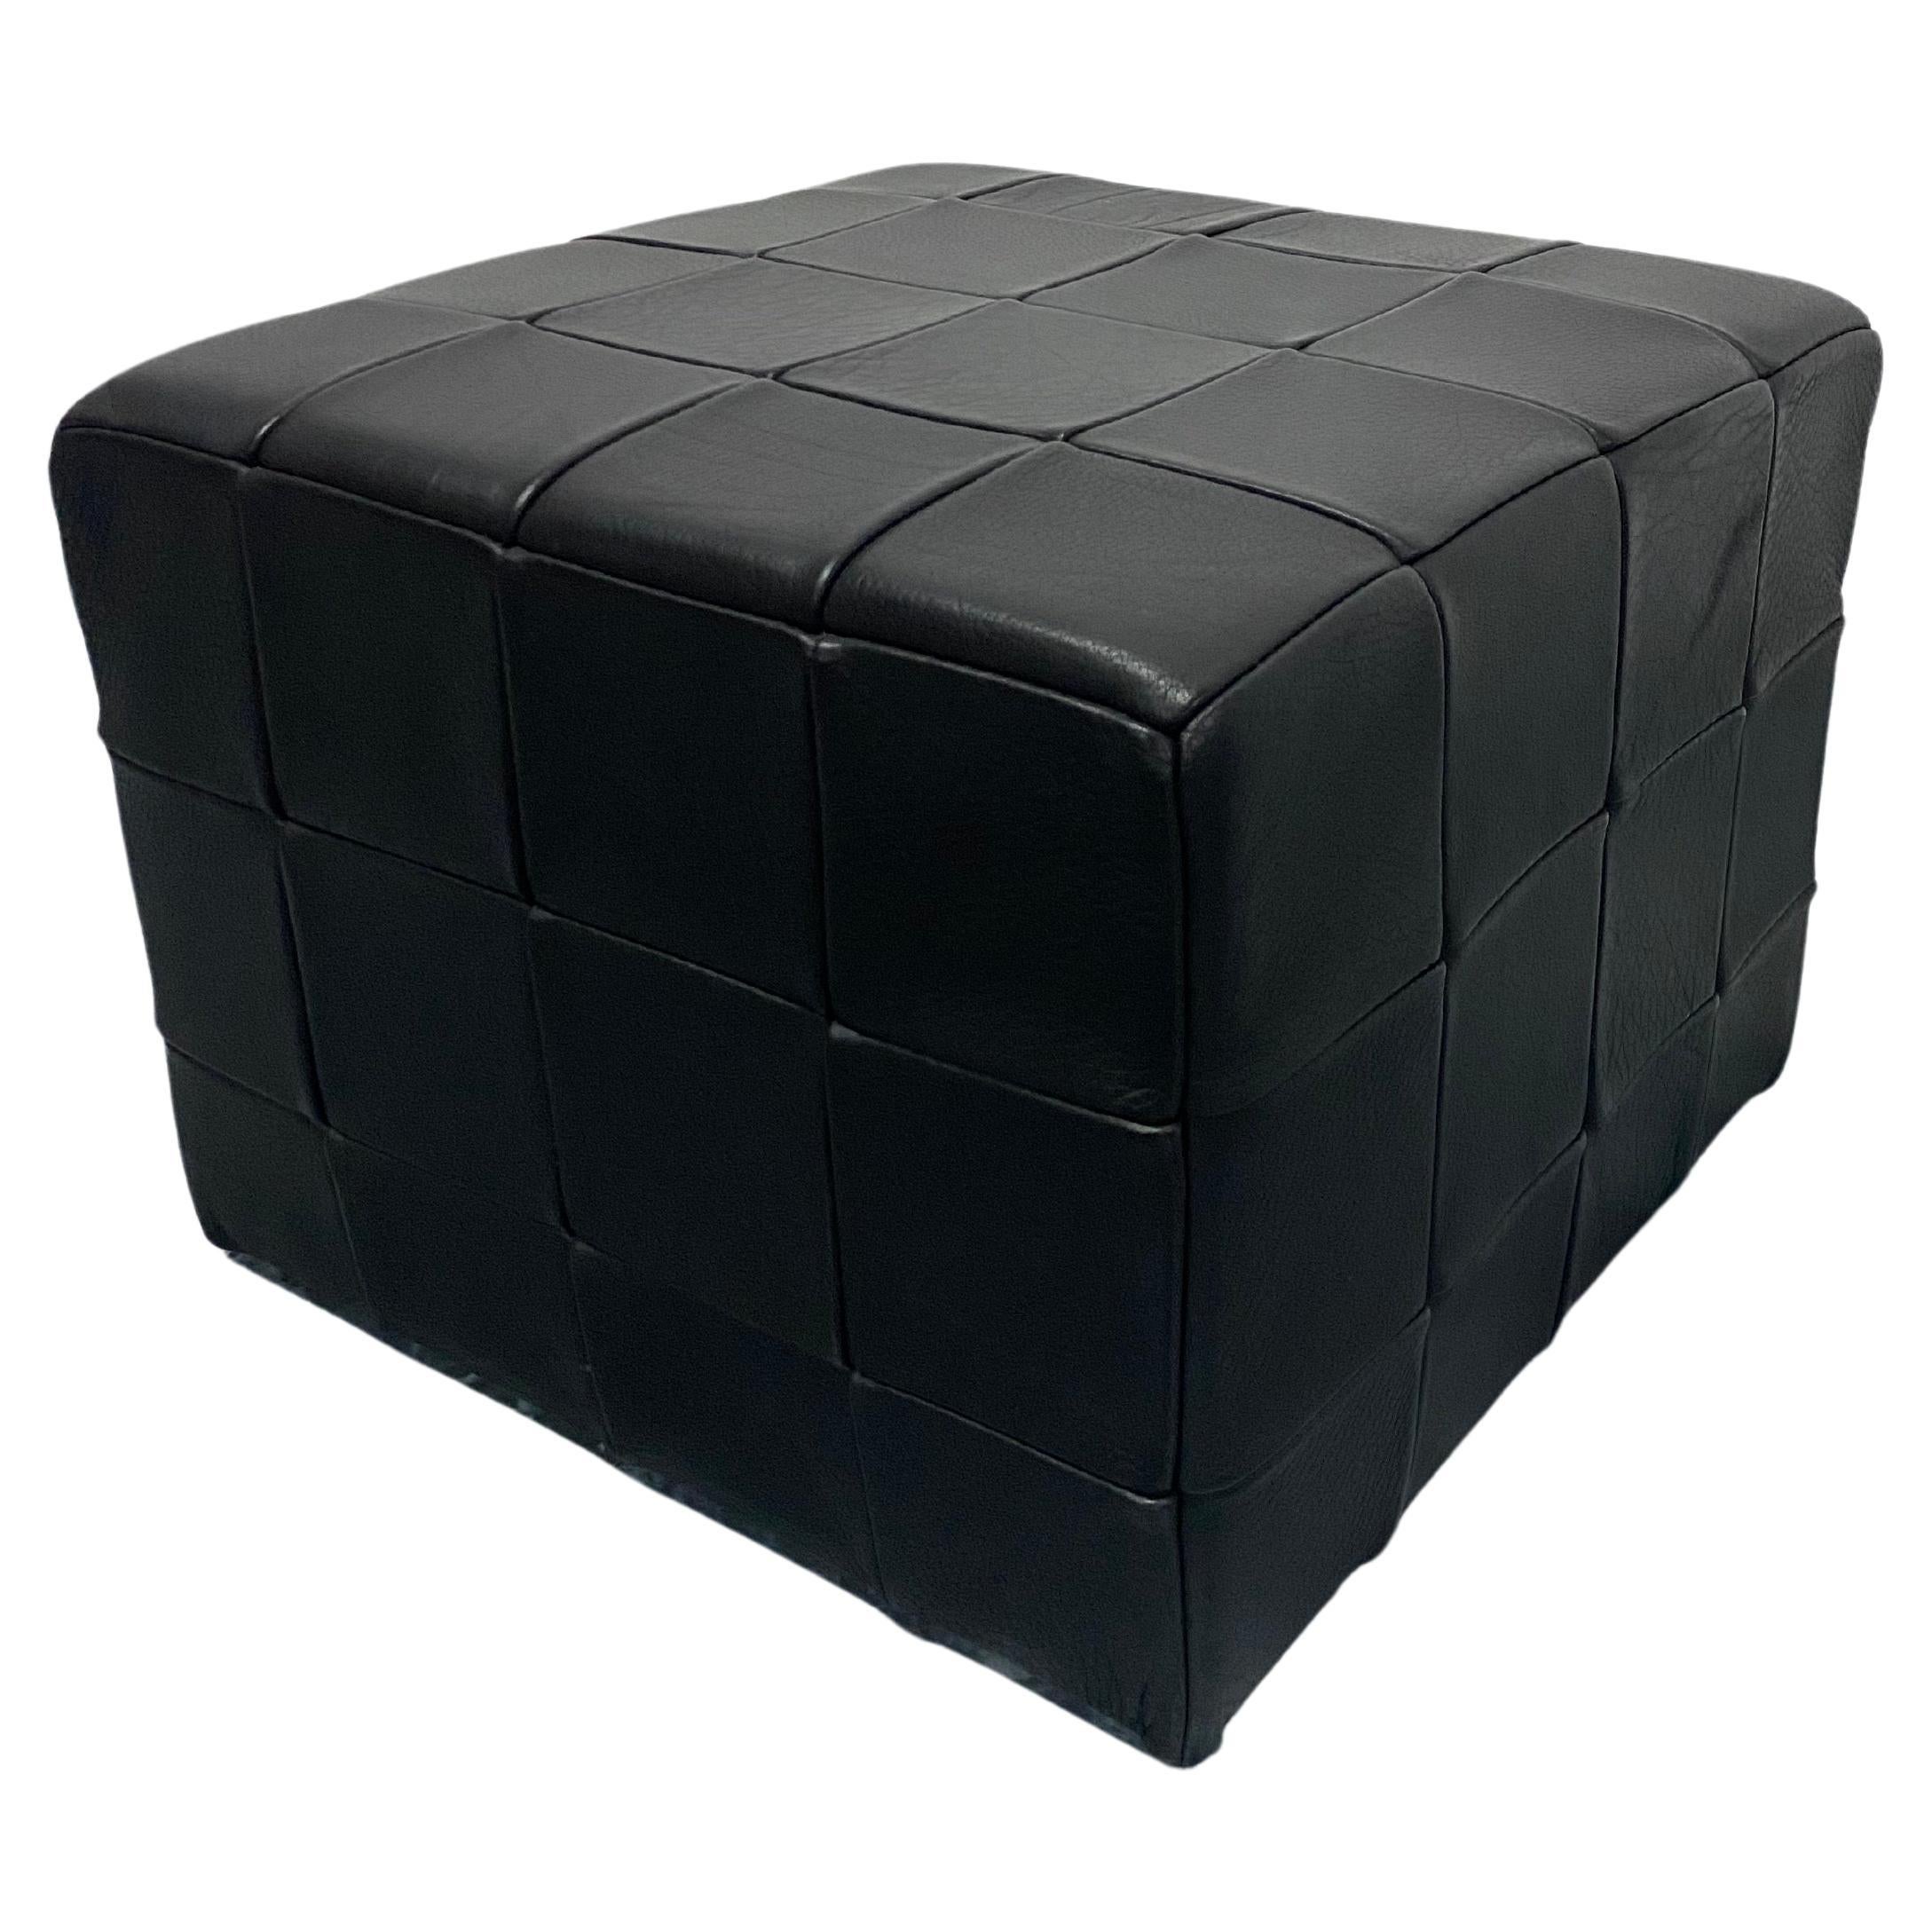 Patchwork Black Leather Pouf or Ottoman, Denmark 1970s For Sale